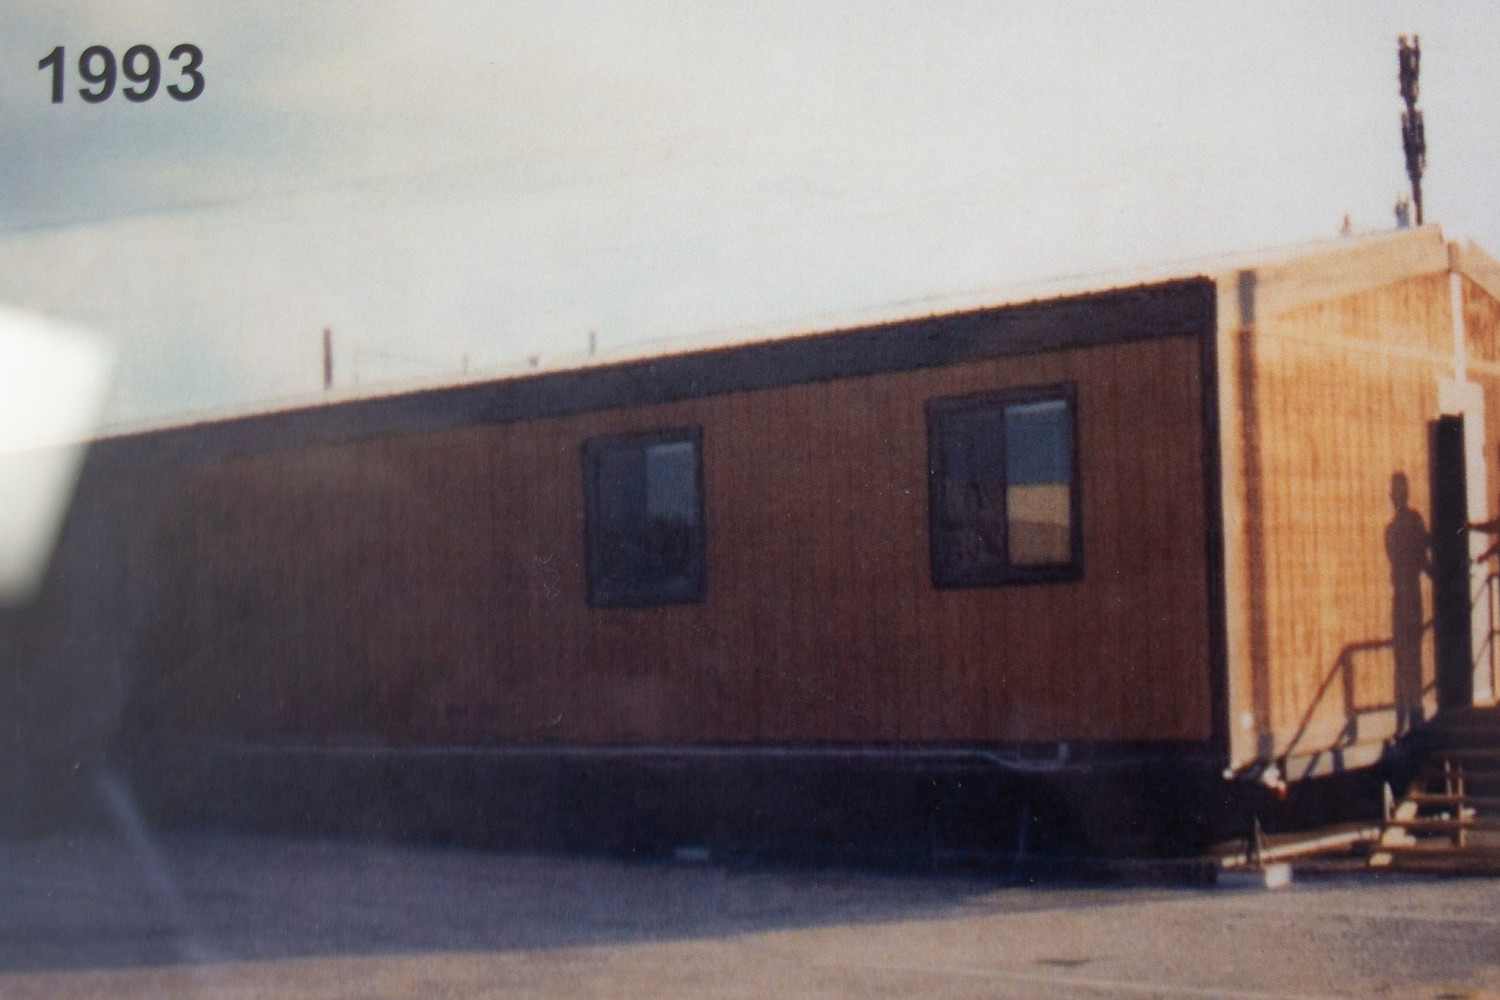 Before the Sievers Medical Clinic was built, Dr. Hisey had to work out of this double wide trailer in the early 1990s.